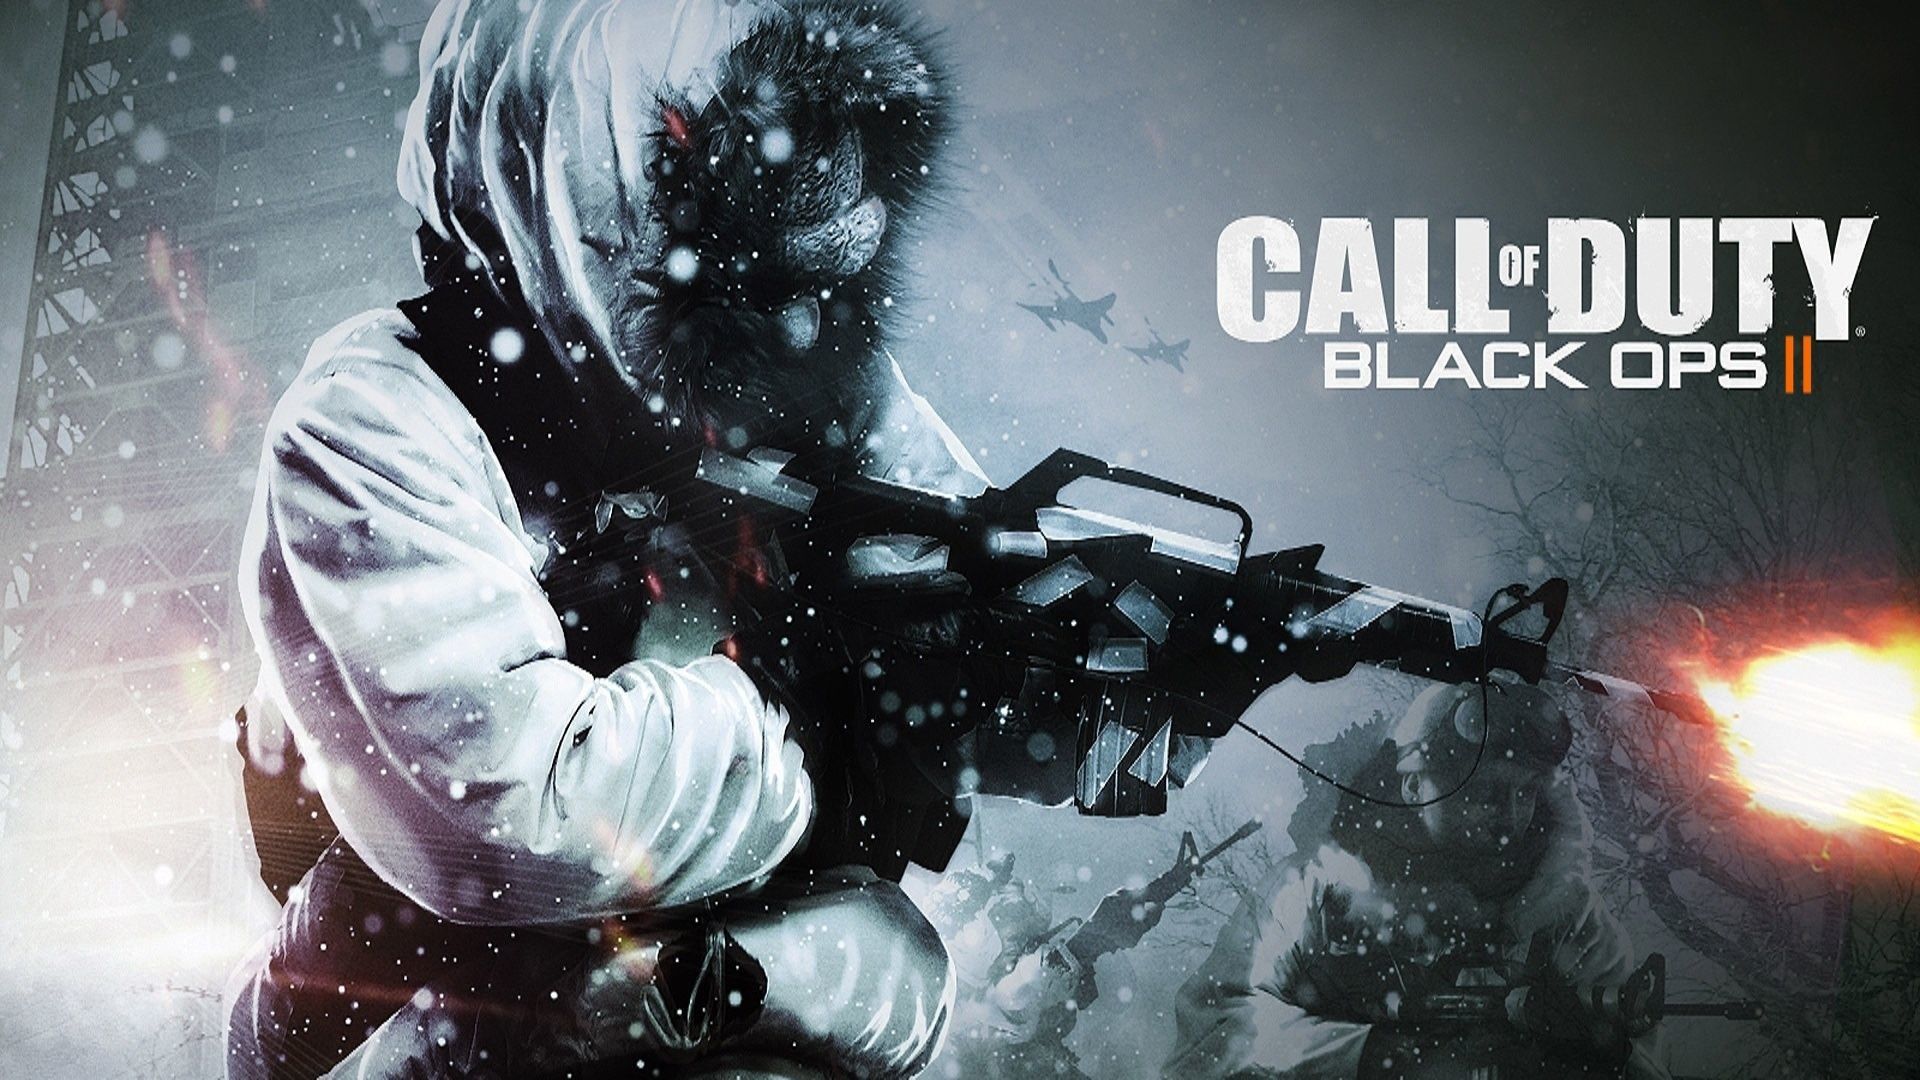 Call Of Duty Black Ops 2 HD Wide Wallpaper for Widescreen